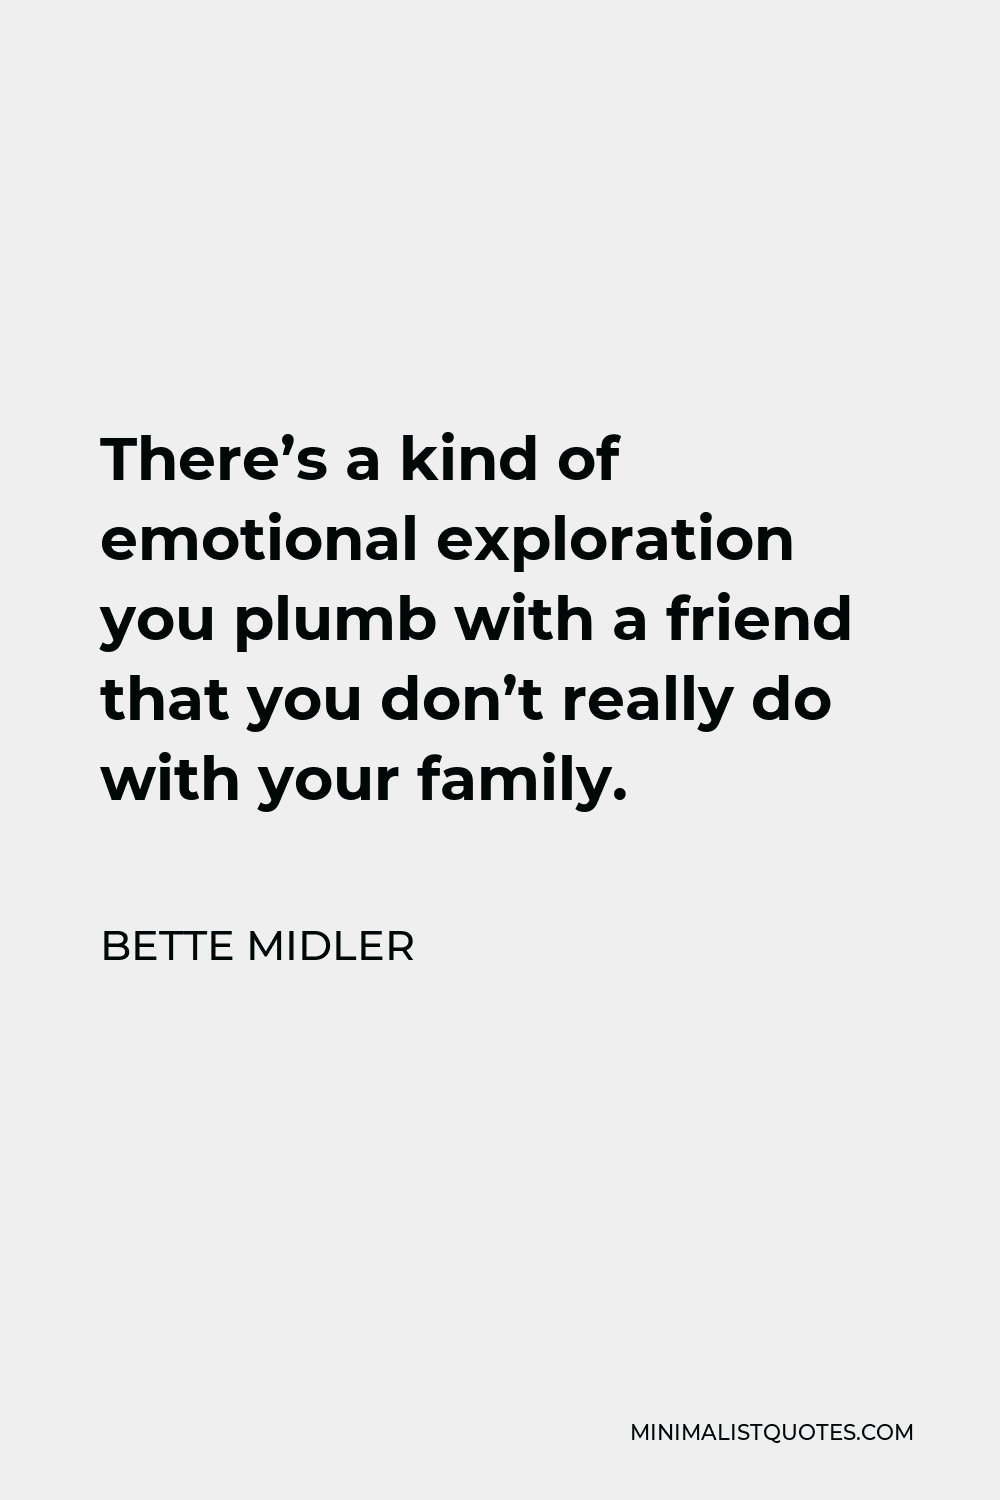 Bette Midler Quote - There’s a kind of emotional exploration you plumb with a friend that you don’t really do with your family.